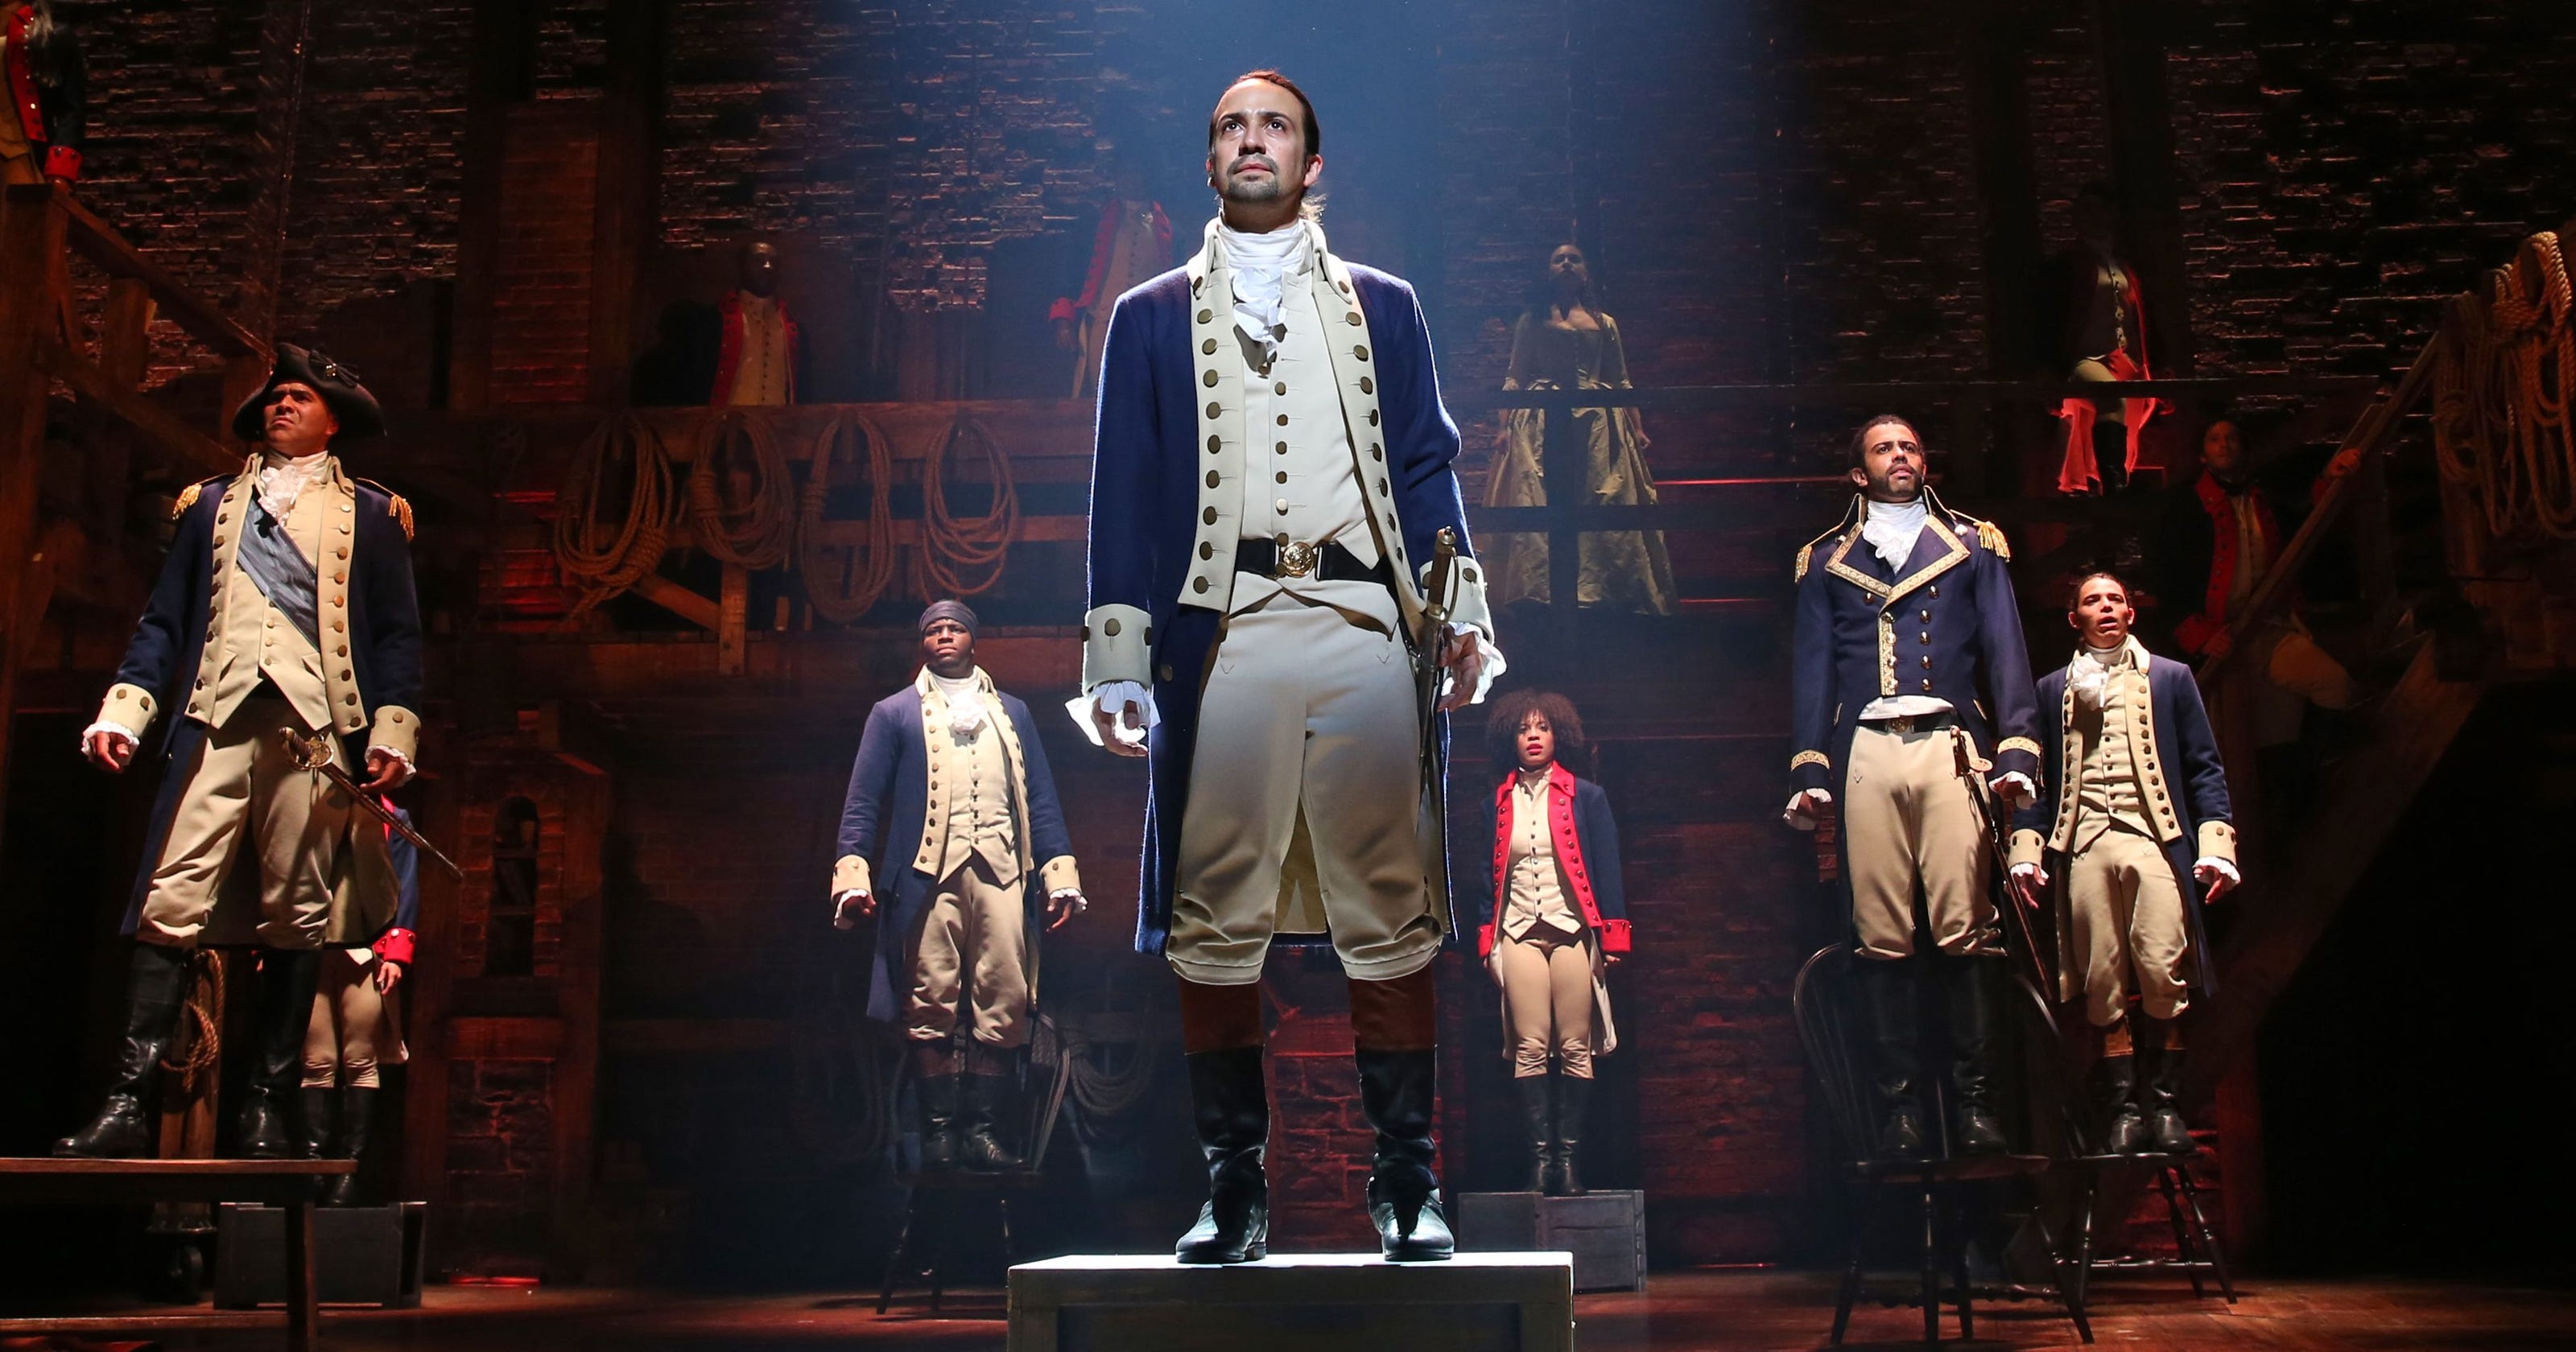 4th of July : A tale of freedom, Michelle Myers, Hamilton an American musical. Photo: Joan Marcus